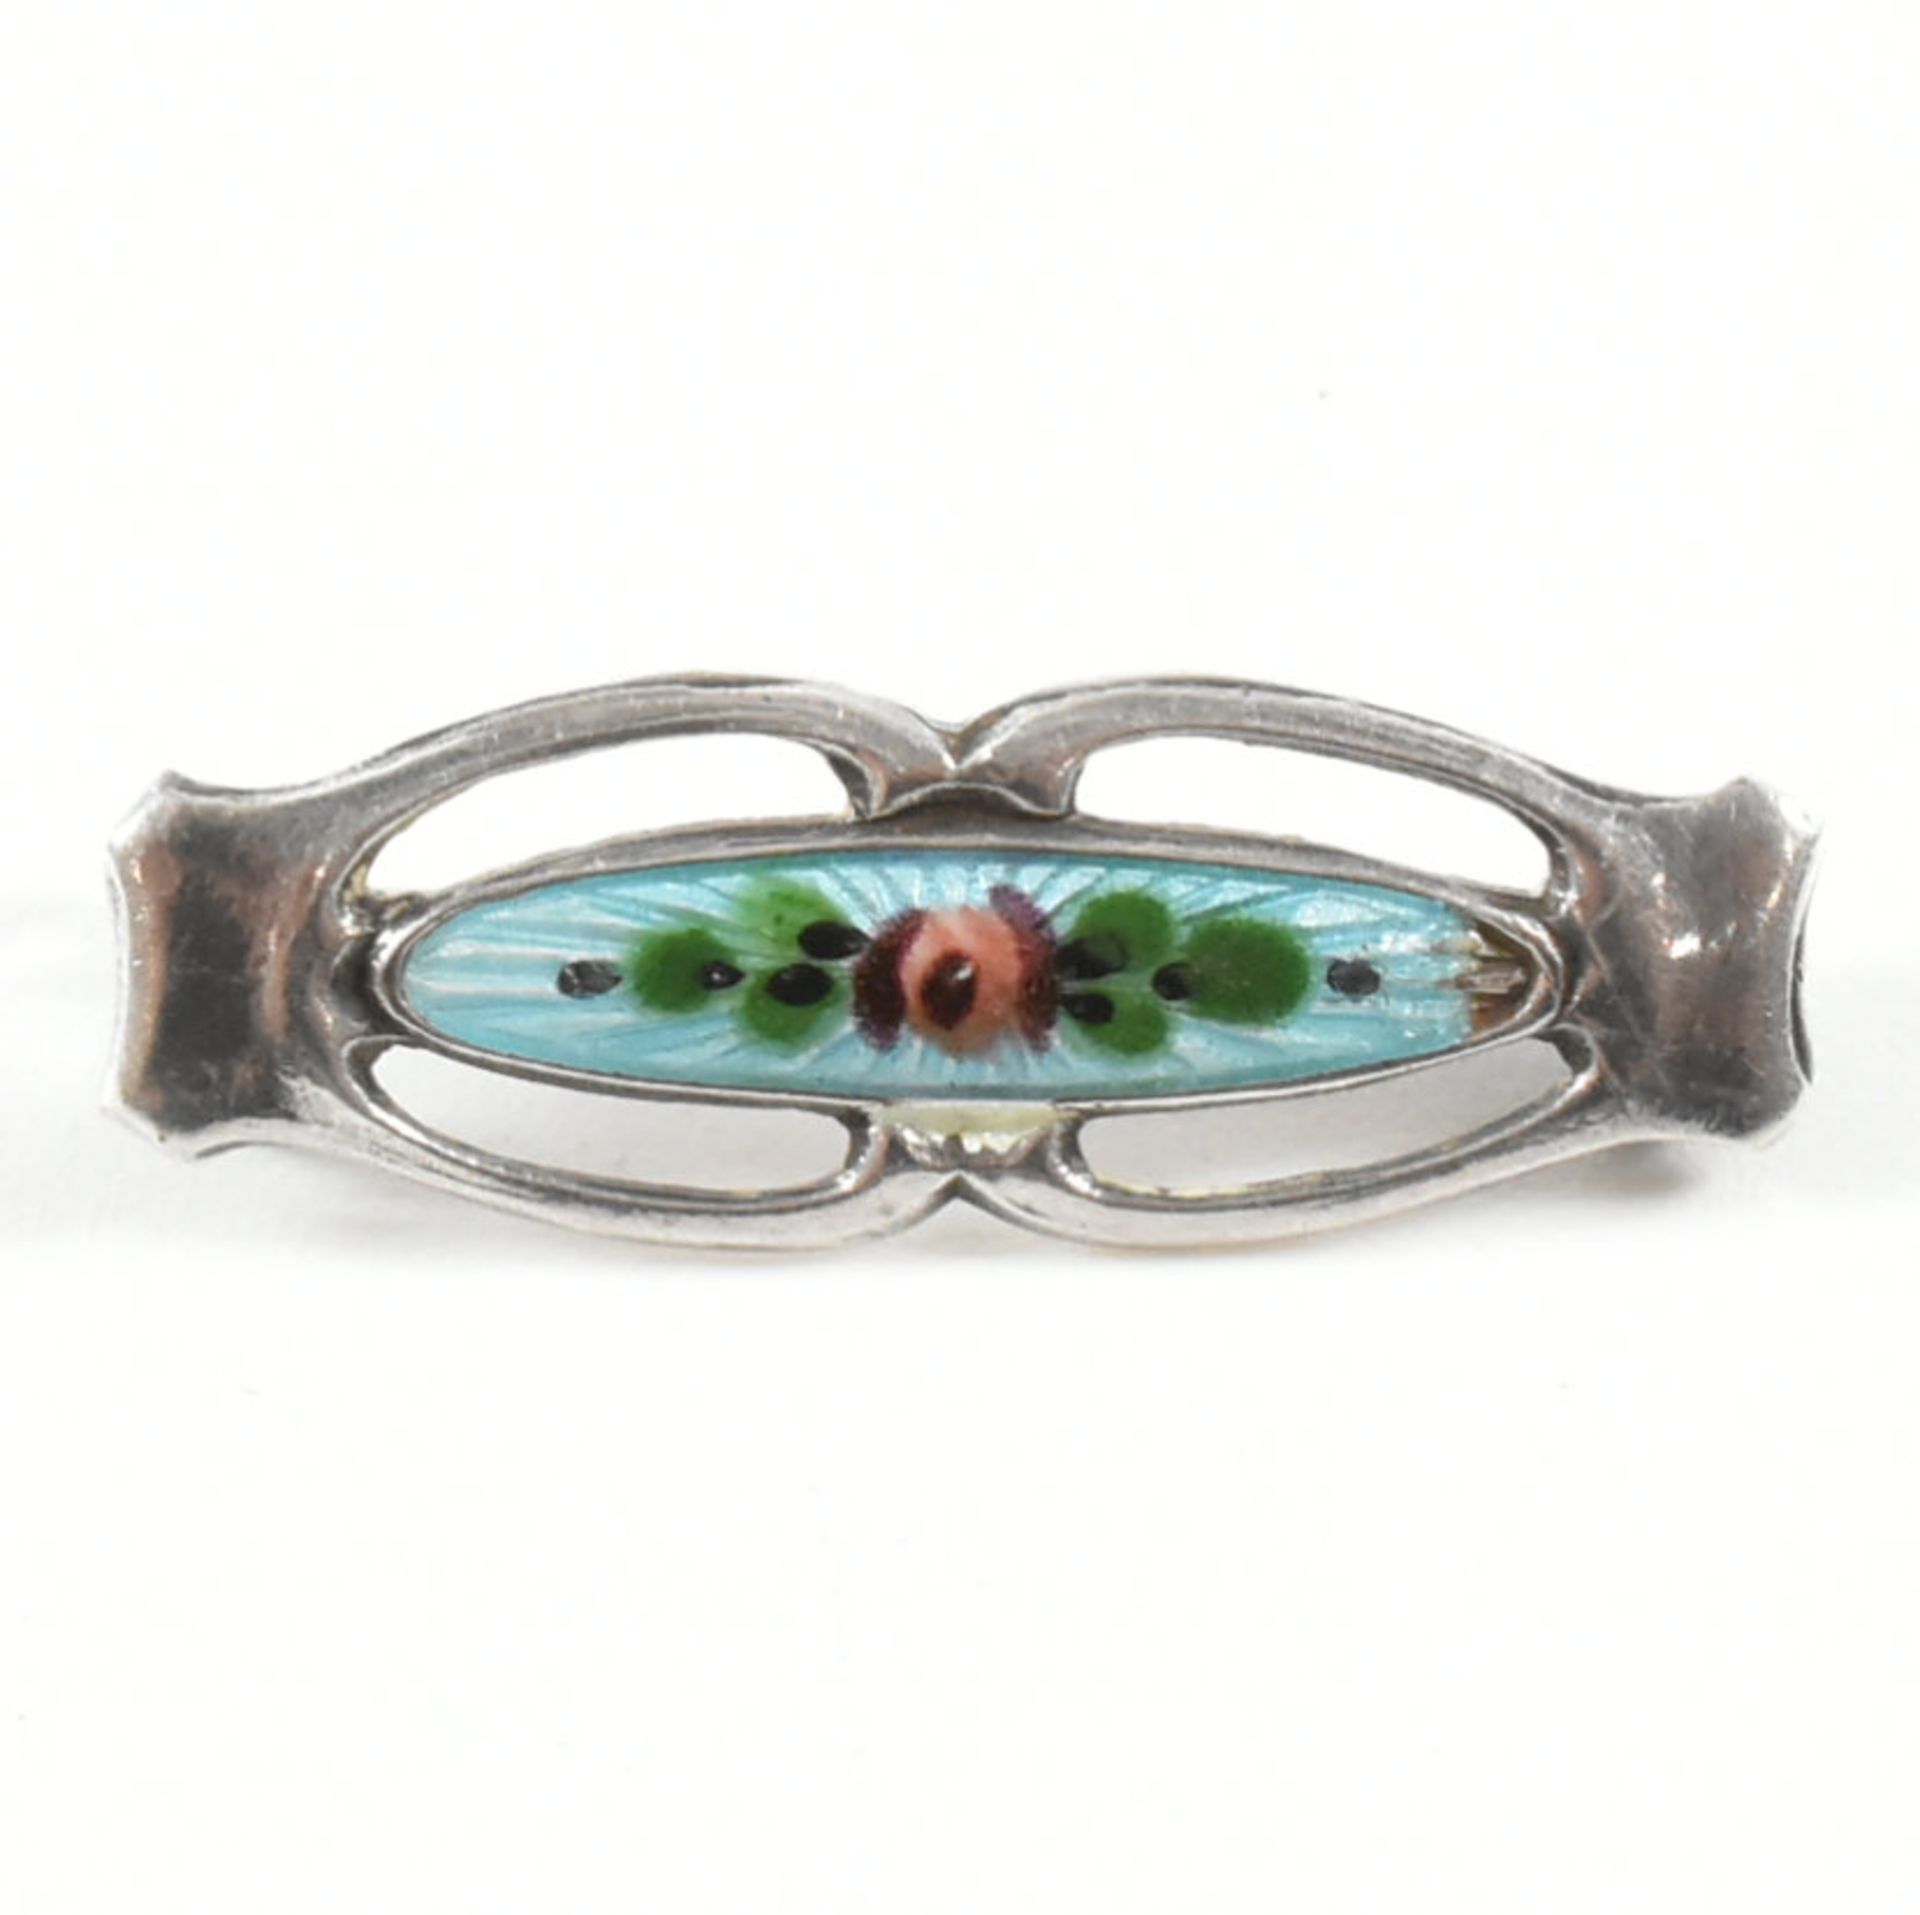 CHARLES HORNER - 1914 SILVER & ENAMEL BROOCH PIN WITH ANOTHER - Image 17 of 17